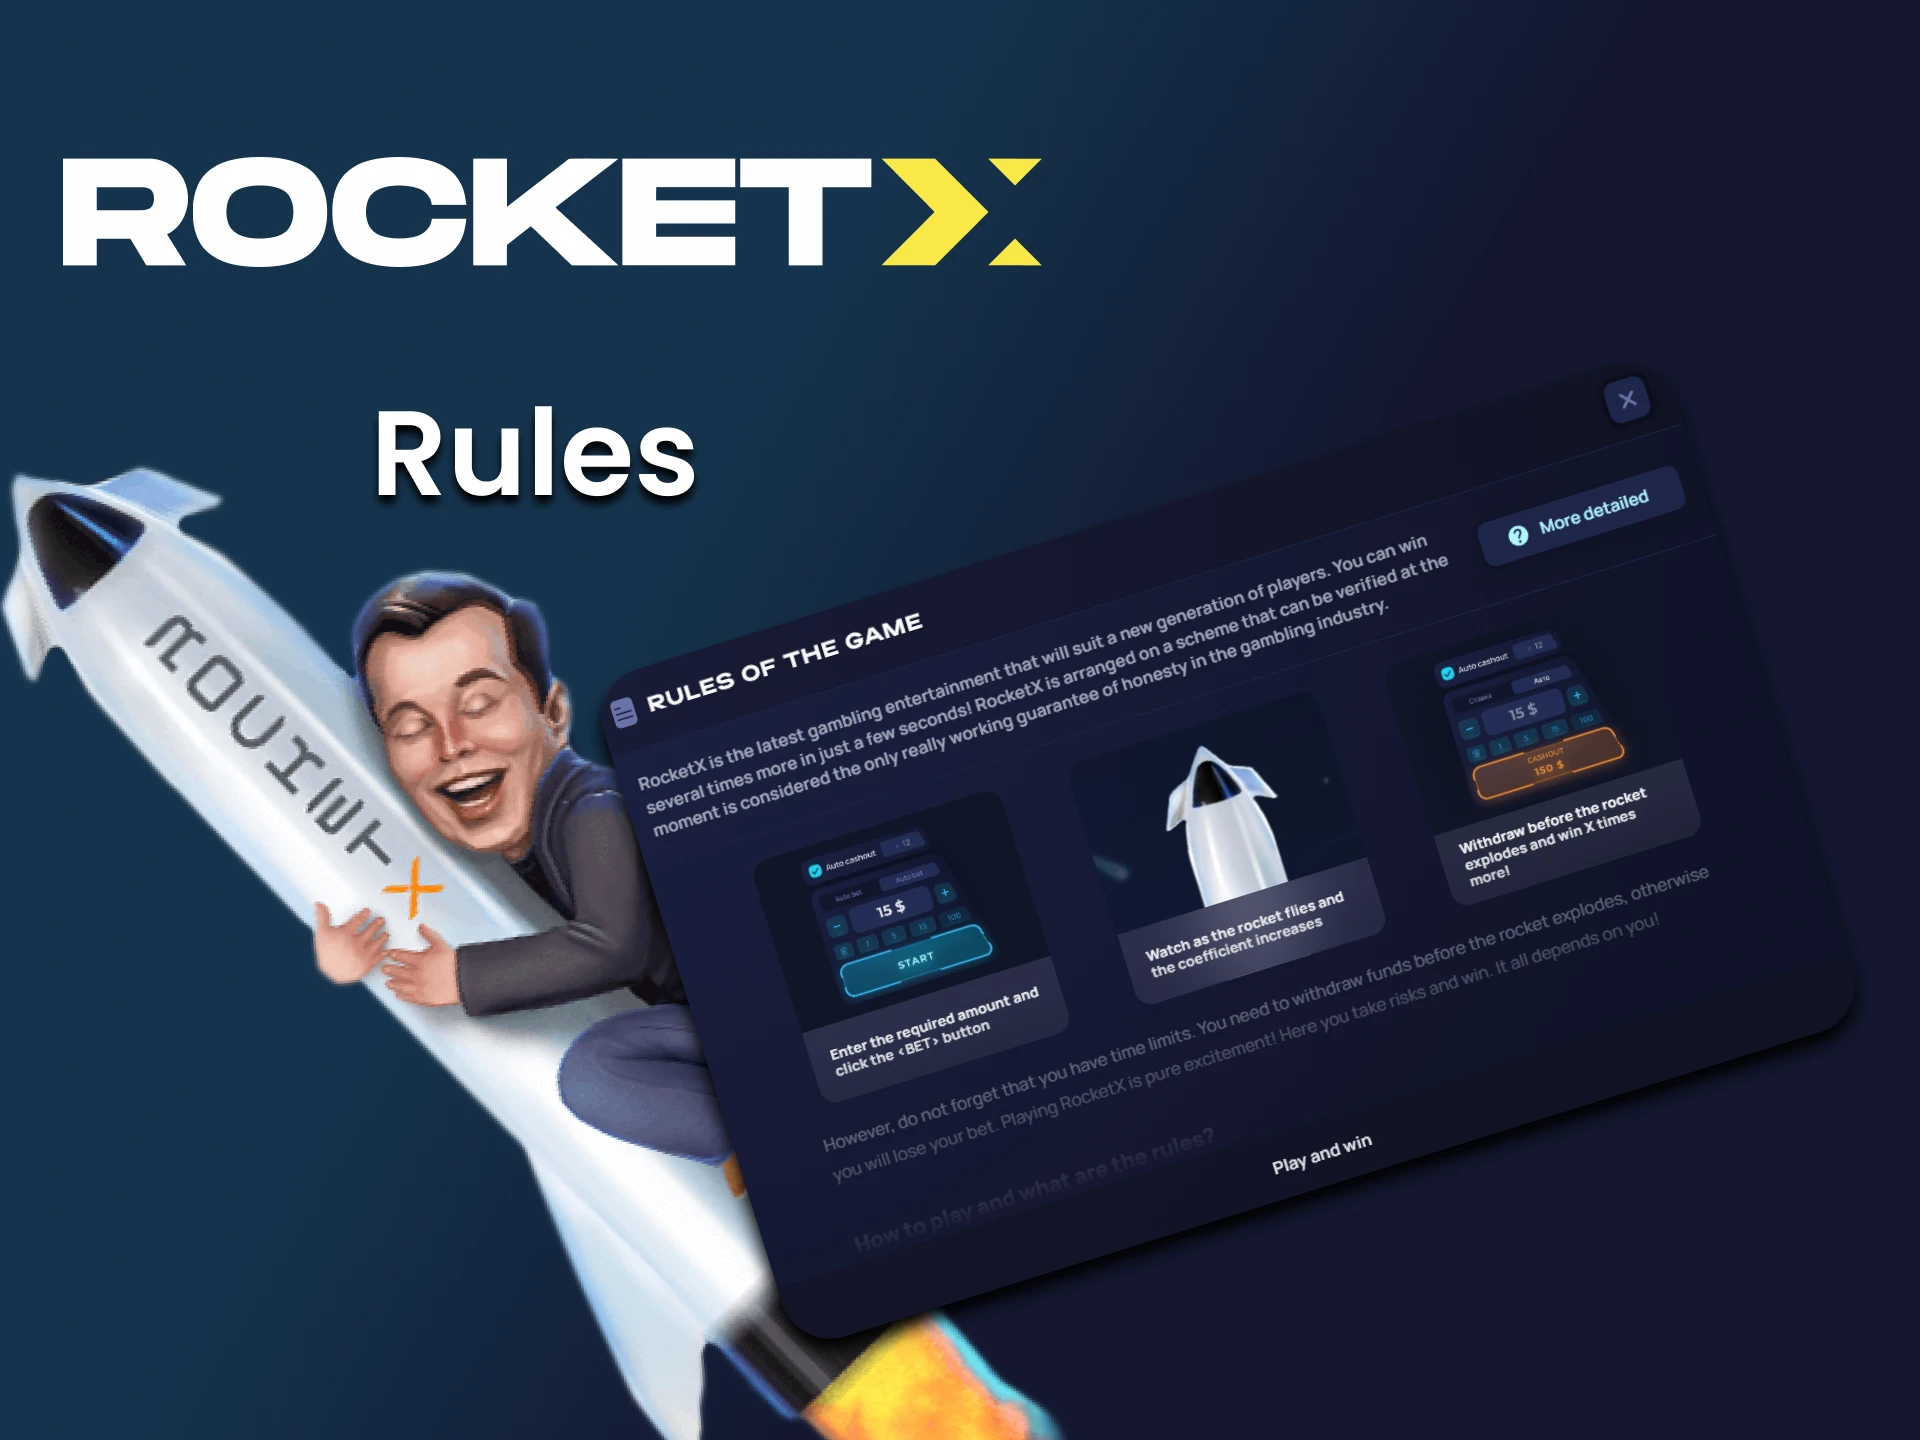 Learn all about the rules of the Rocket X game.